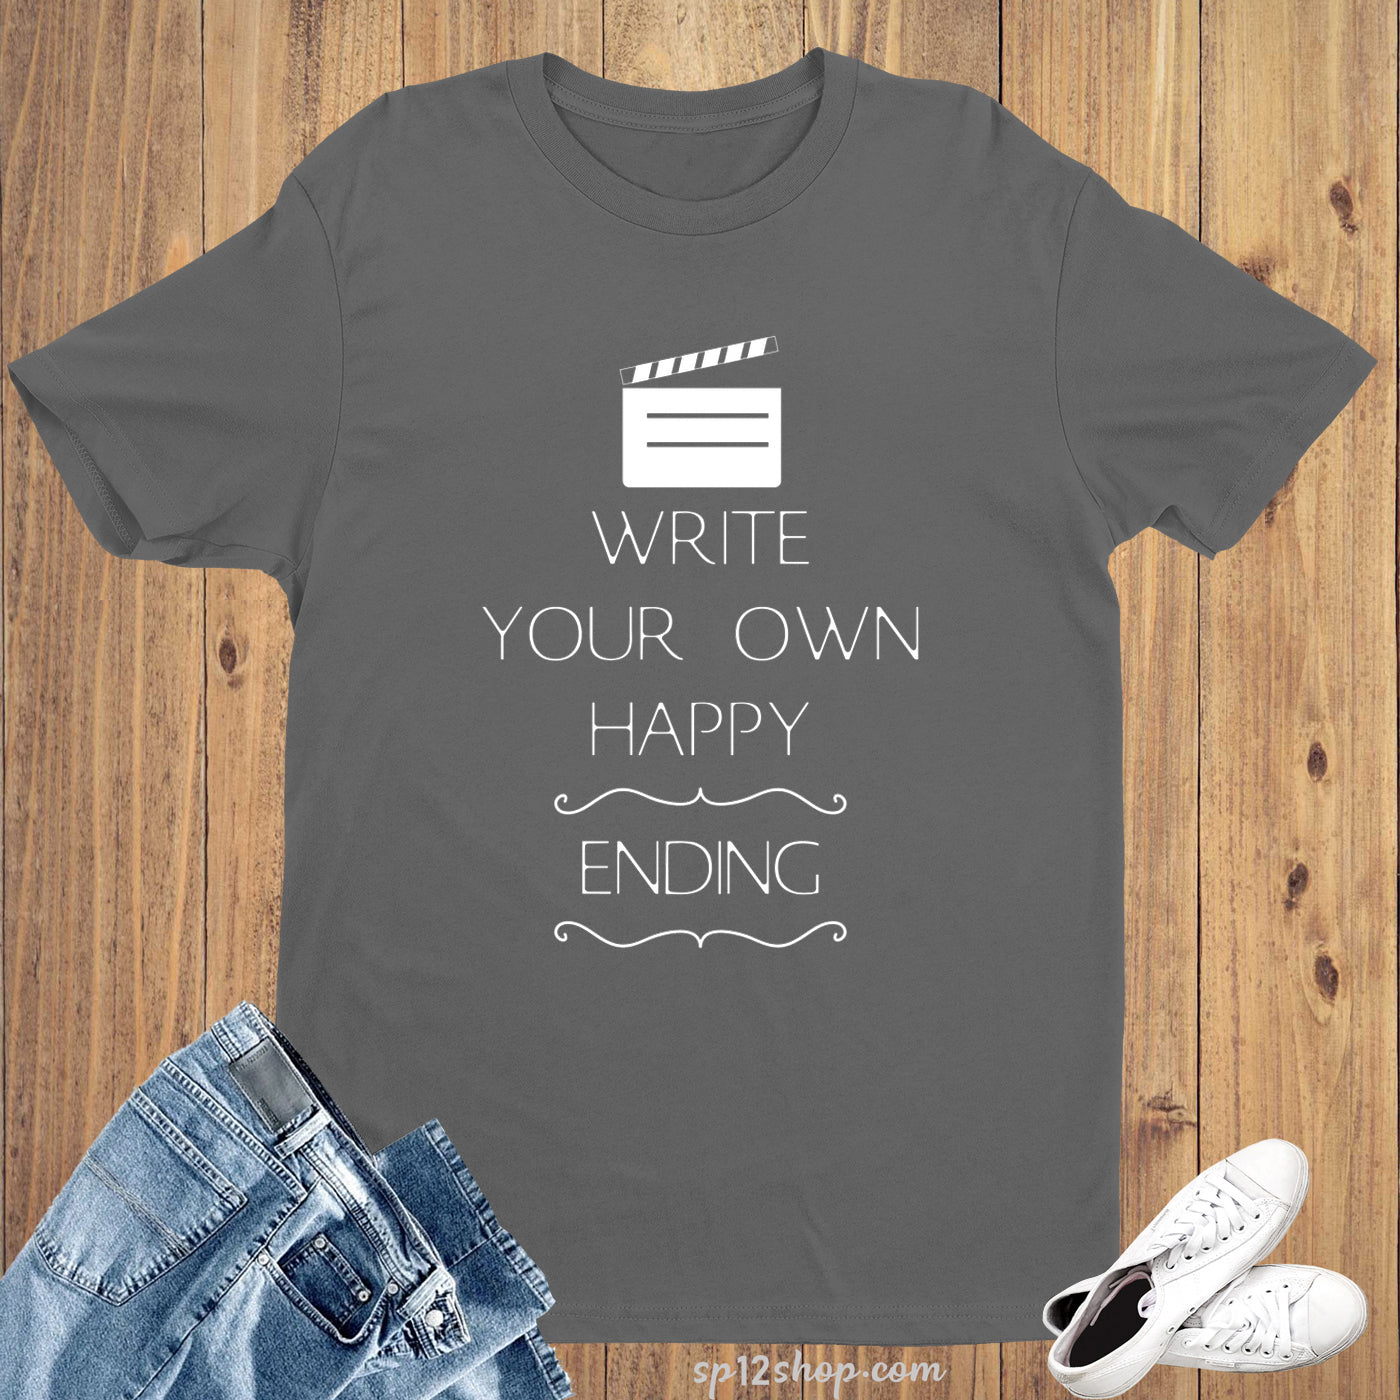 Write Your Own Happy Ending Motivational Slogan T shirt